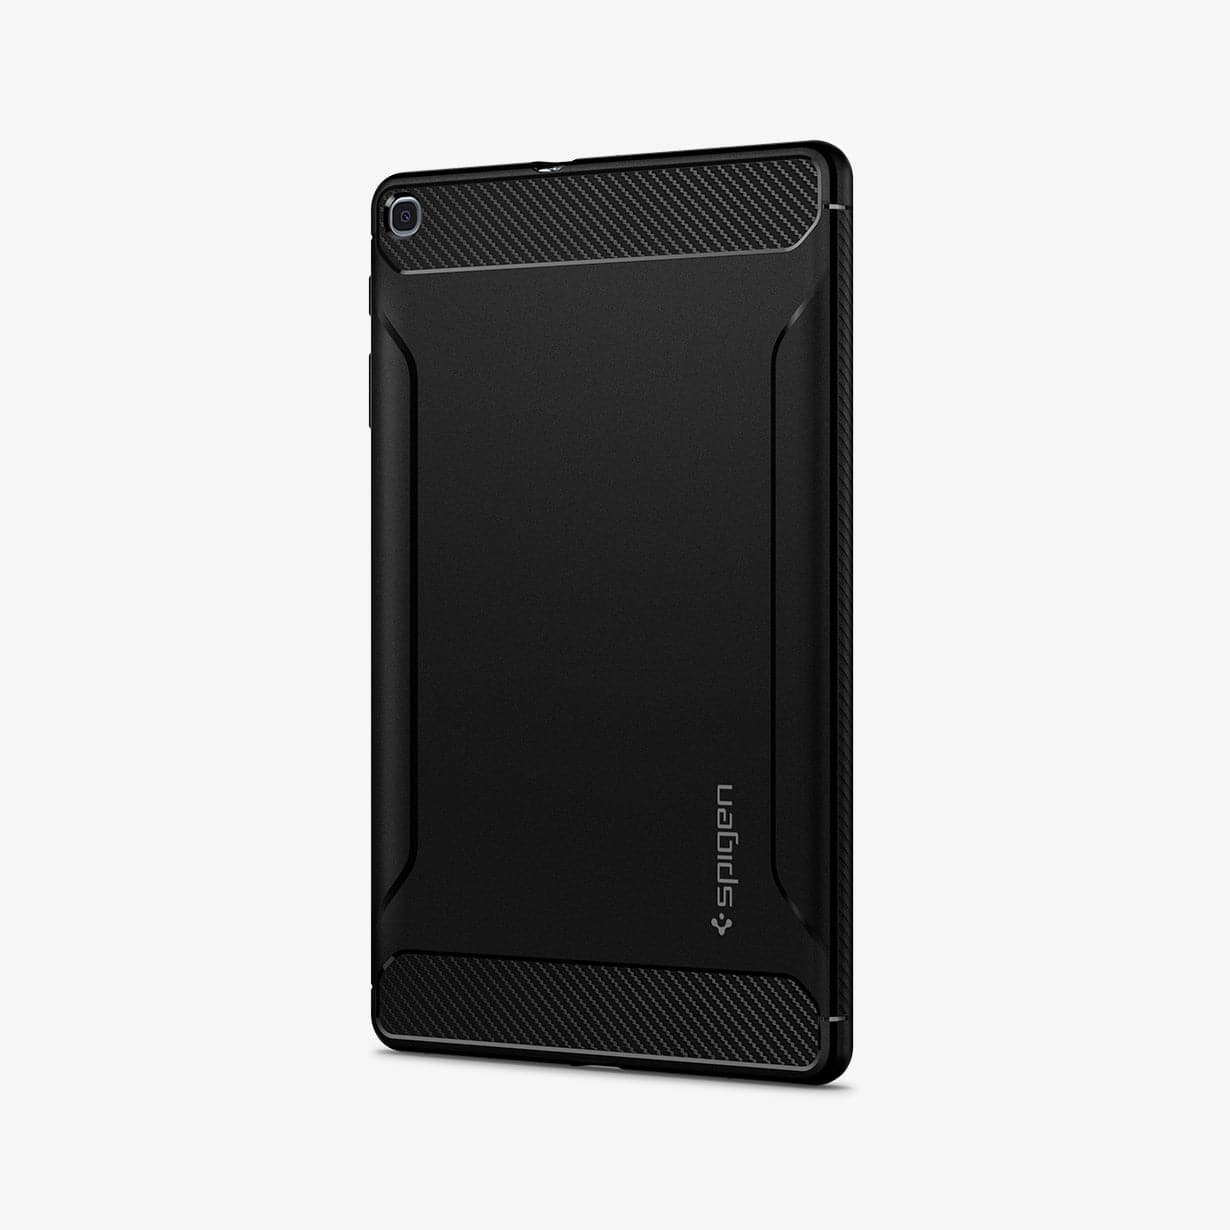 623CS26448 - Galaxy Tab A 10.1" Case Rugged Armor in matte black showing the back and side